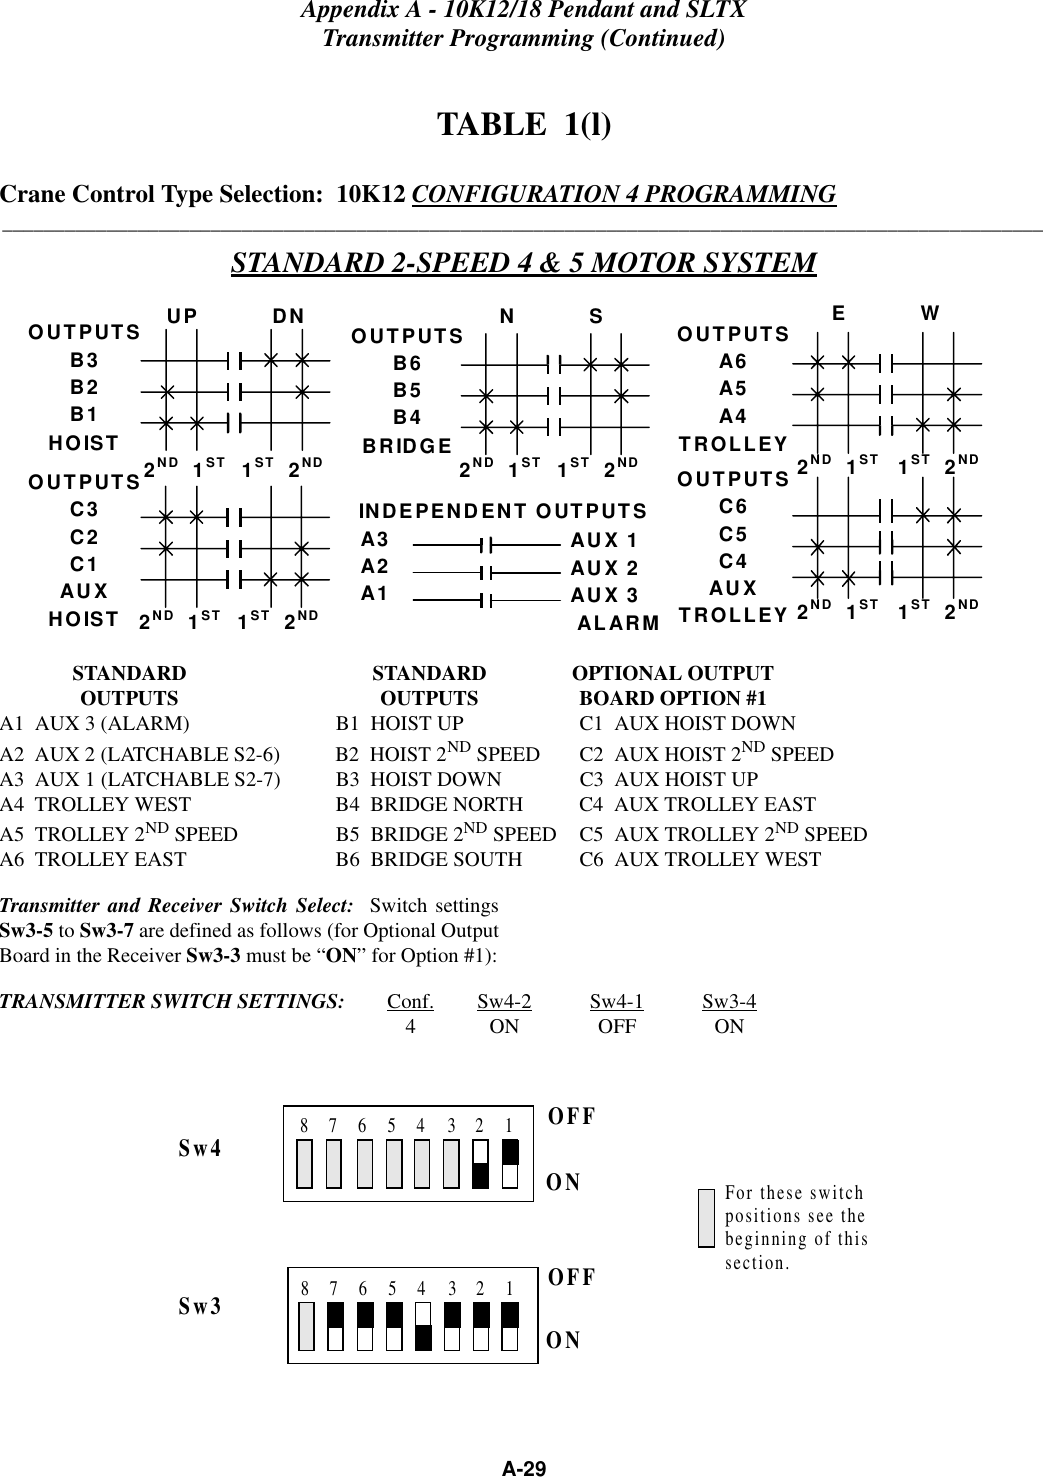 Appendix A - 10K12/18 Pendant and SLTXTransmitter Programming (Continued)A-29TABLE  1(l)Crane Control Type Selection:  10K12 CONFIGURATION 4 PROGRAMMING____________________________________________________________________________________________________STANDARD 2-SPEED 4 &amp; 5 MOTOR SYSTEMSTANDARD STANDARD OPTIONAL OUTPUTOUTPUTS OUTPUTS BOARD OPTION #1A1  AUX 3 (ALARM) B1  HOIST UP C1  AUX HOIST DOWNA2  AUX 2 (LATCHABLE S2-6) B2  HOIST 2ND SPEED C2  AUX HOIST 2ND SPEEDA3  AUX 1 (LATCHABLE S2-7) B3  HOIST DOWN C3  AUX HOIST UPA4  TROLLEY WEST B4  BRIDGE NORTH C4  AUX TROLLEY EASTA5  TROLLEY 2ND SPEED B5  BRIDGE 2ND SPEED C5  AUX TROLLEY 2ND SPEEDA6  TROLLEY EAST B6  BRIDGE SOUTH C6  AUX TROLLEY WESTTransmitter and Receiver Switch Select:  Switch settingsSw3-5 to Sw3-7 are defined as follows (for Optional OutputBoard in the Receiver Sw3-3 must be “ON” for Option #1):TRANSMITTER SWITCH SETTINGS: Conf. Sw4-2 Sw4-1 Sw3-44ON OFF ONOUTPUTSB3B2B1HOISTOUTPUTSB6B5B4BRIDGE2ND  1ST 1ST  2ND 1ST  2NDUP           DN N           SA3A2A1AUX 1AUX 2AUX 3 ALARMINDEPENDENT OUTPUTS2ND  1STOUTPUTSA6A5A4TROLLEY 1ST  2NDE           W2ND  1ST1ST  2ND 1ST  2ND2ND  1STOUTPUTSC6C5C4AUXTROLLEY 2ND  1STOUTPUTSC3C2C1AUXHOISTOFFONSw4Sw3 OFFONFor these switchpositions see thebeginning of thissection.1823456718234567